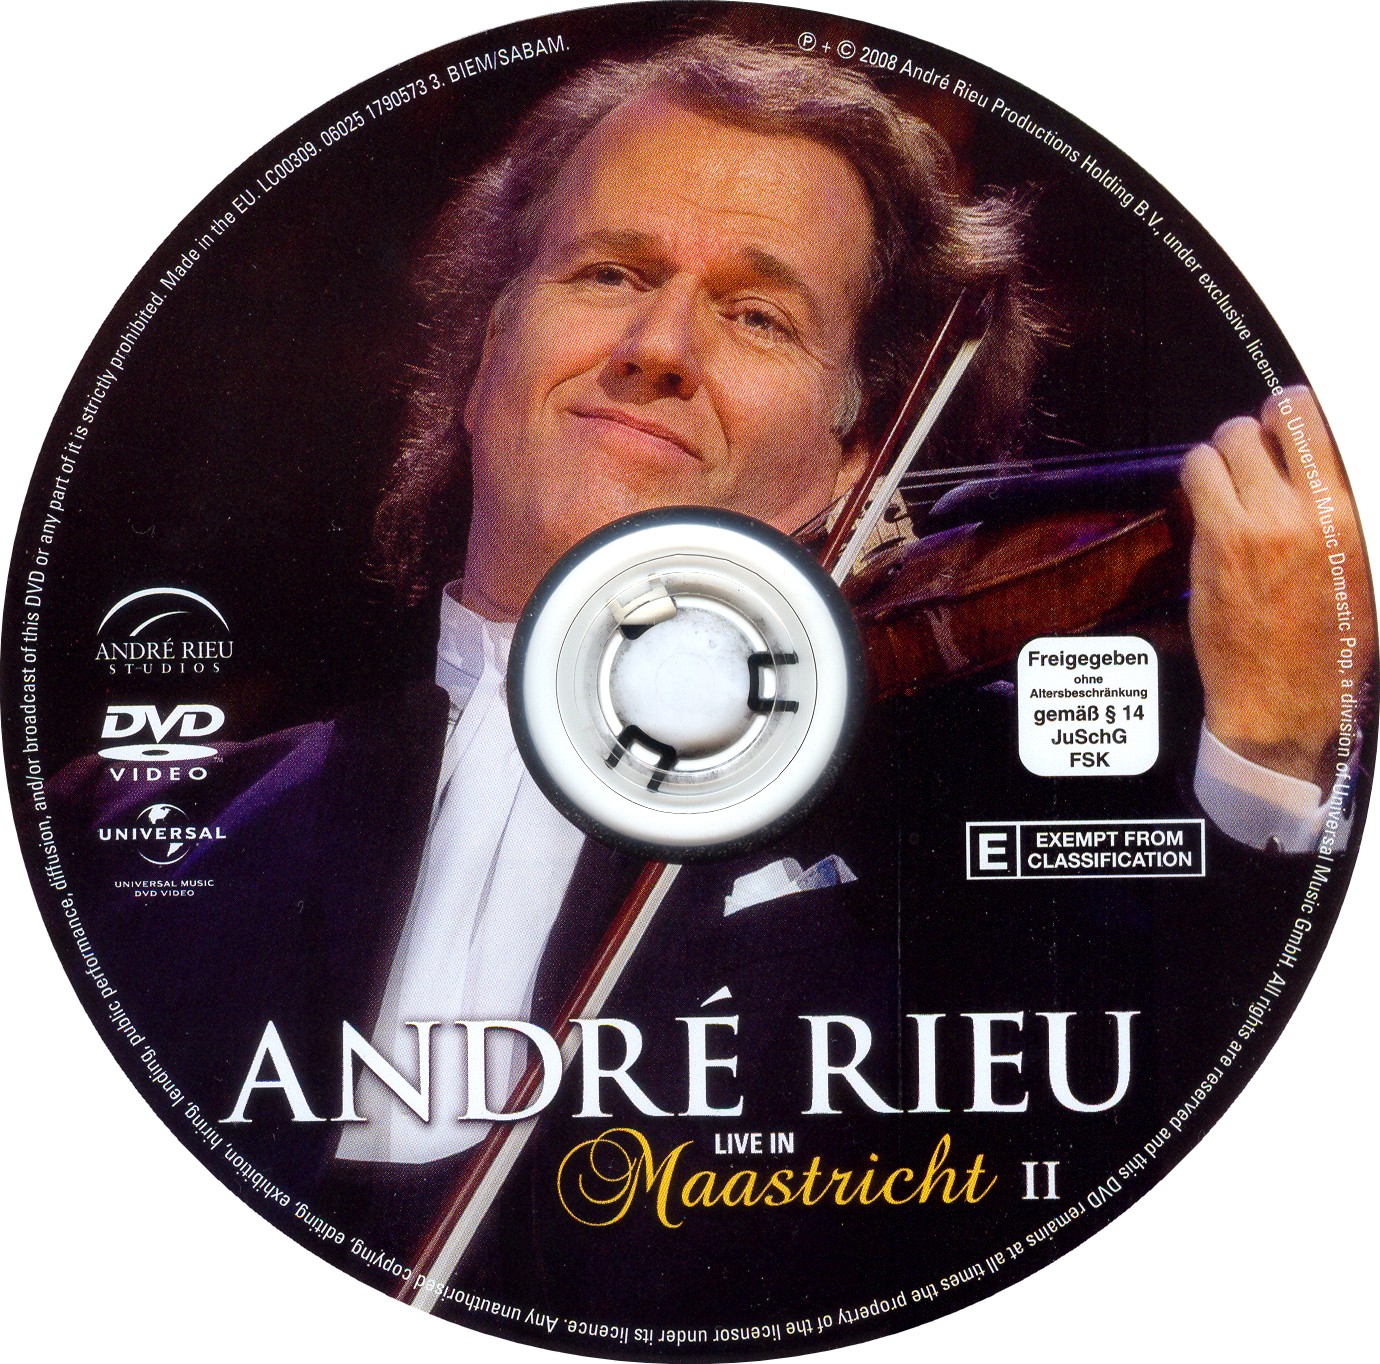 Andre rieu live in Maastricht 2